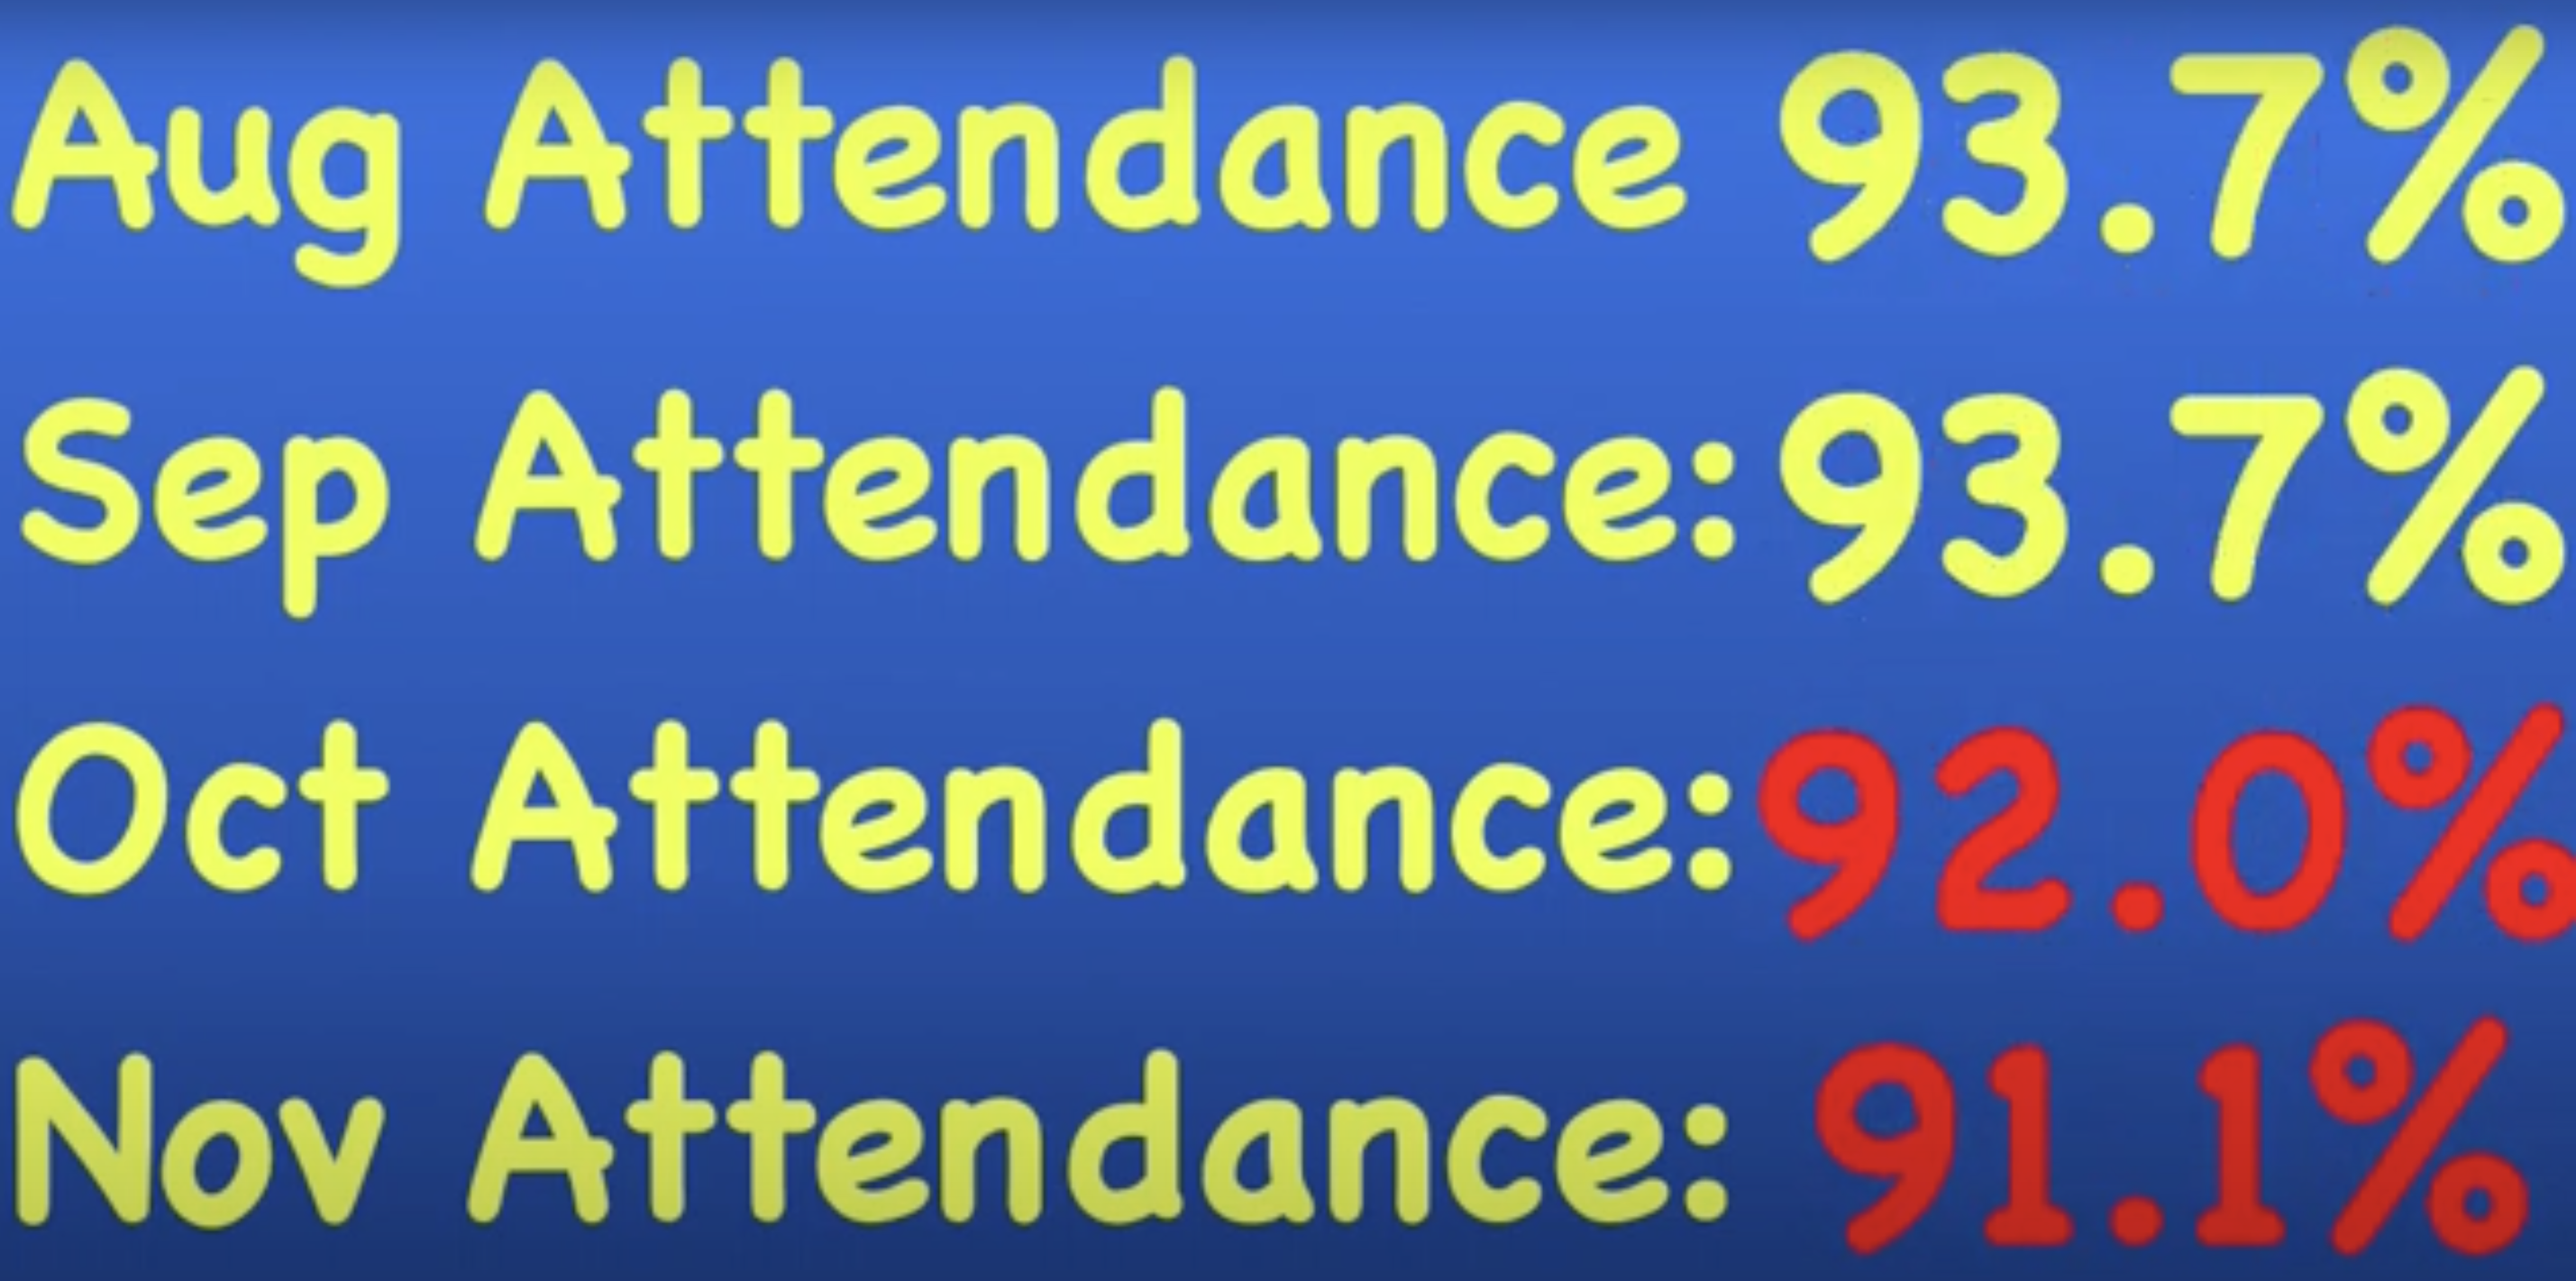 November's average daily attendance was 91.1%